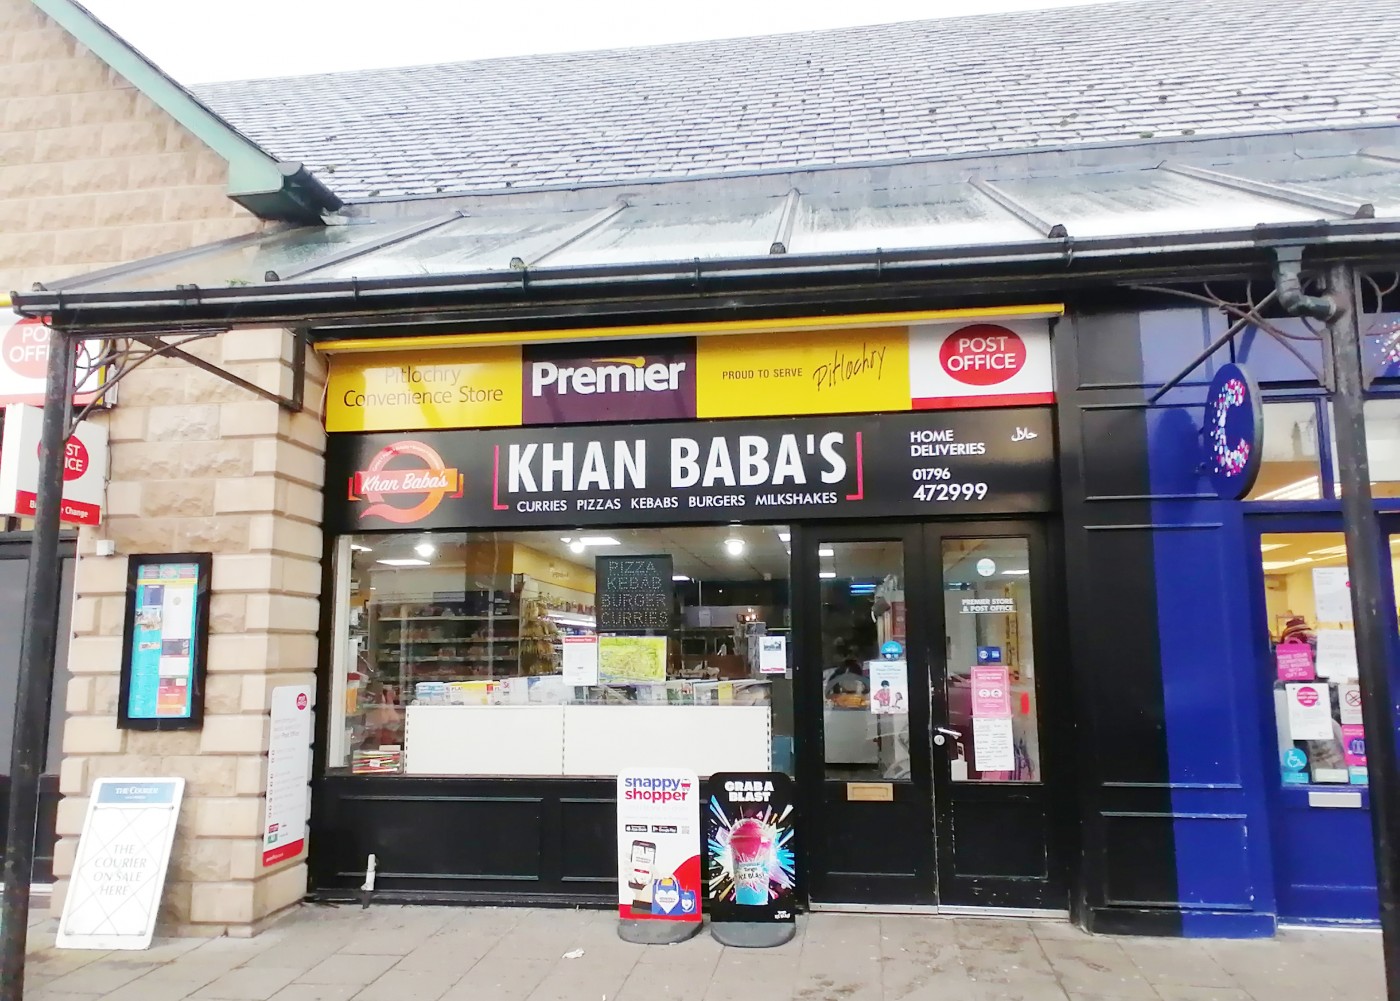 Khan Baba's takeaway restaurant in Pitlochry town centre.